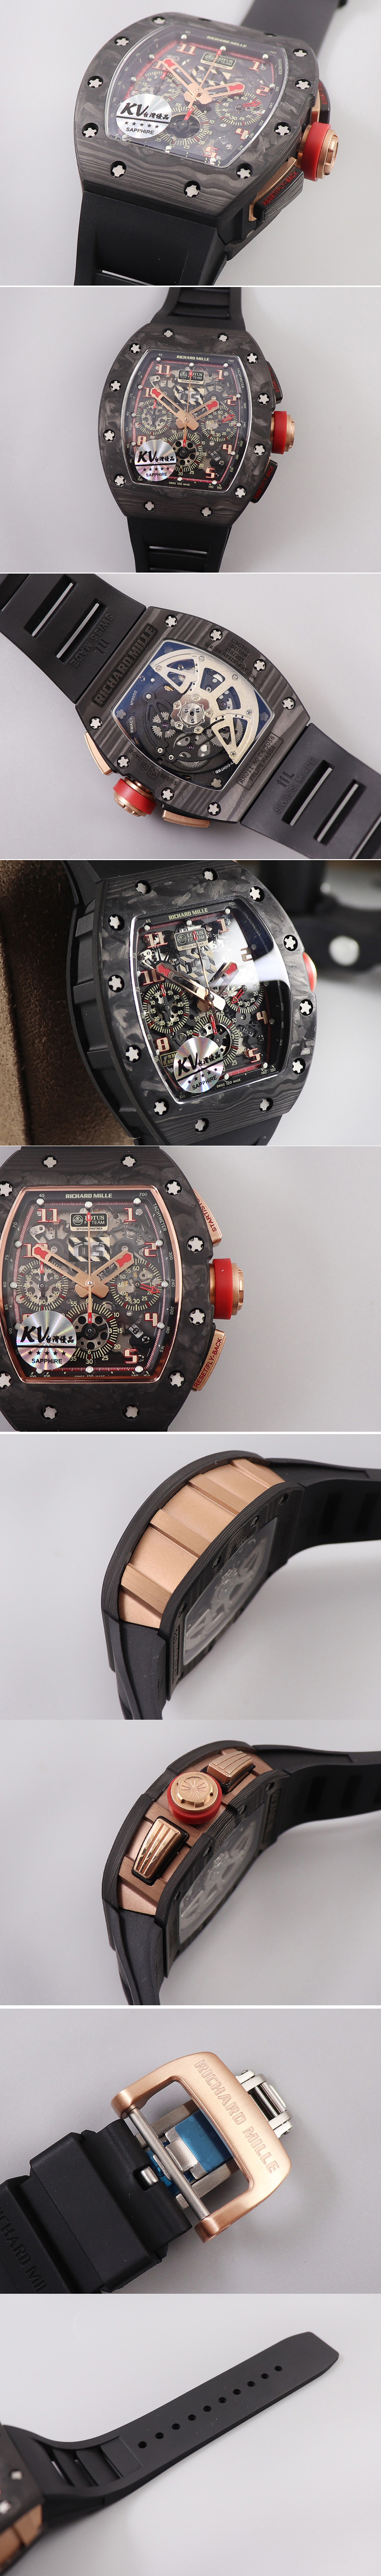 Replica Richard Mille RM011 NTPT Chrono Lotus KVF 1:1 Best Edition Crystal Dial on Black Rubber Strap A7750